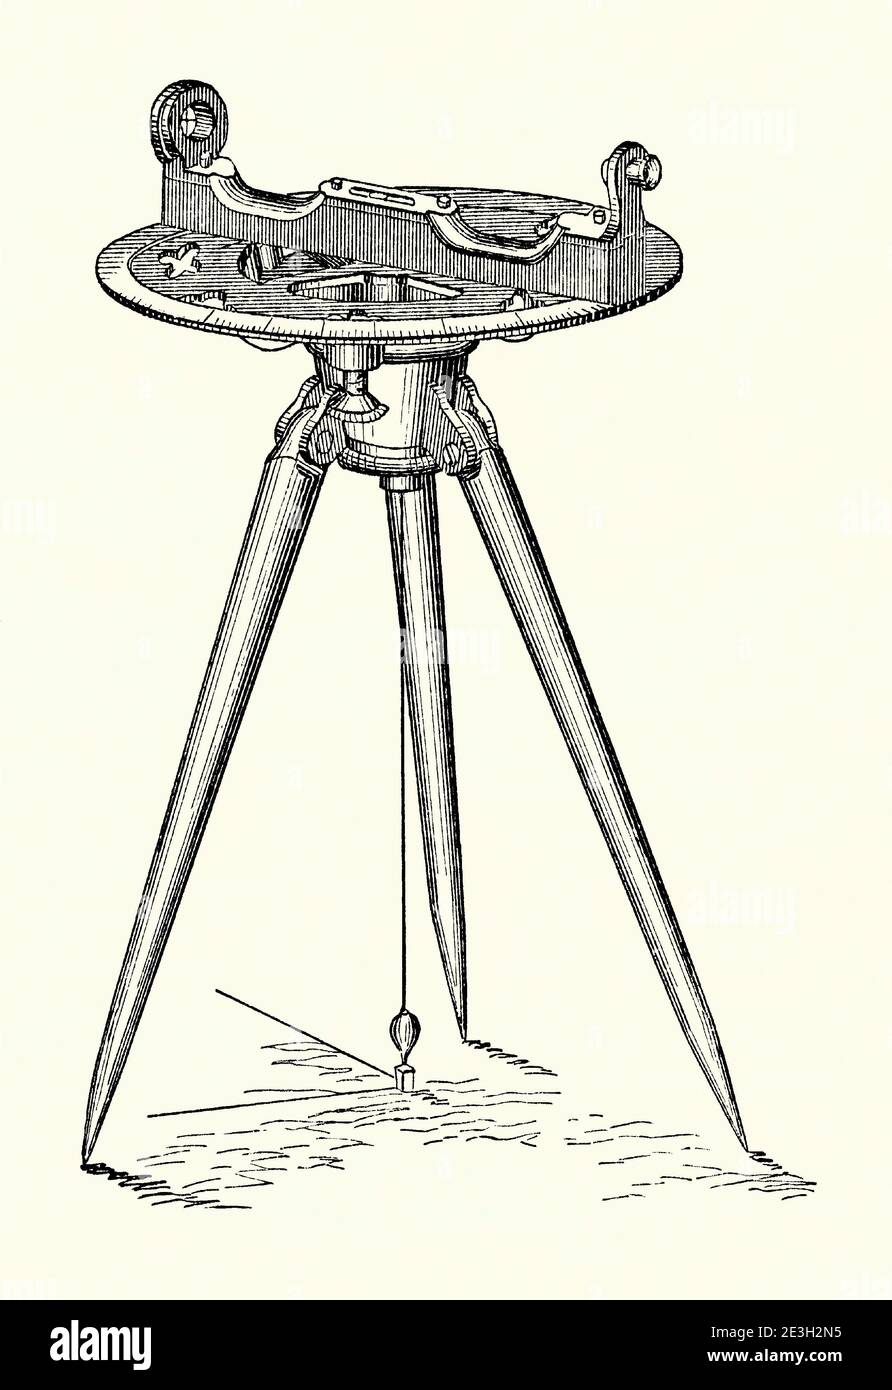 An old engraving of Sibley’s cast-iron level. It is from a Victorian mechanical engineering book of the 1880s. This has a circular table and a viewing sight at one end. A plumb line below accurately fixes the level to a spot on the ground. A spirit level, bubble level, or simply a level, is an instrument designed to indicate whether a surface is horizontal (level) or vertical (plumb). Different types of spirit levels may be used by building trades workers, surveyors, metalworkers, and in some photographic applications. Stock Photo